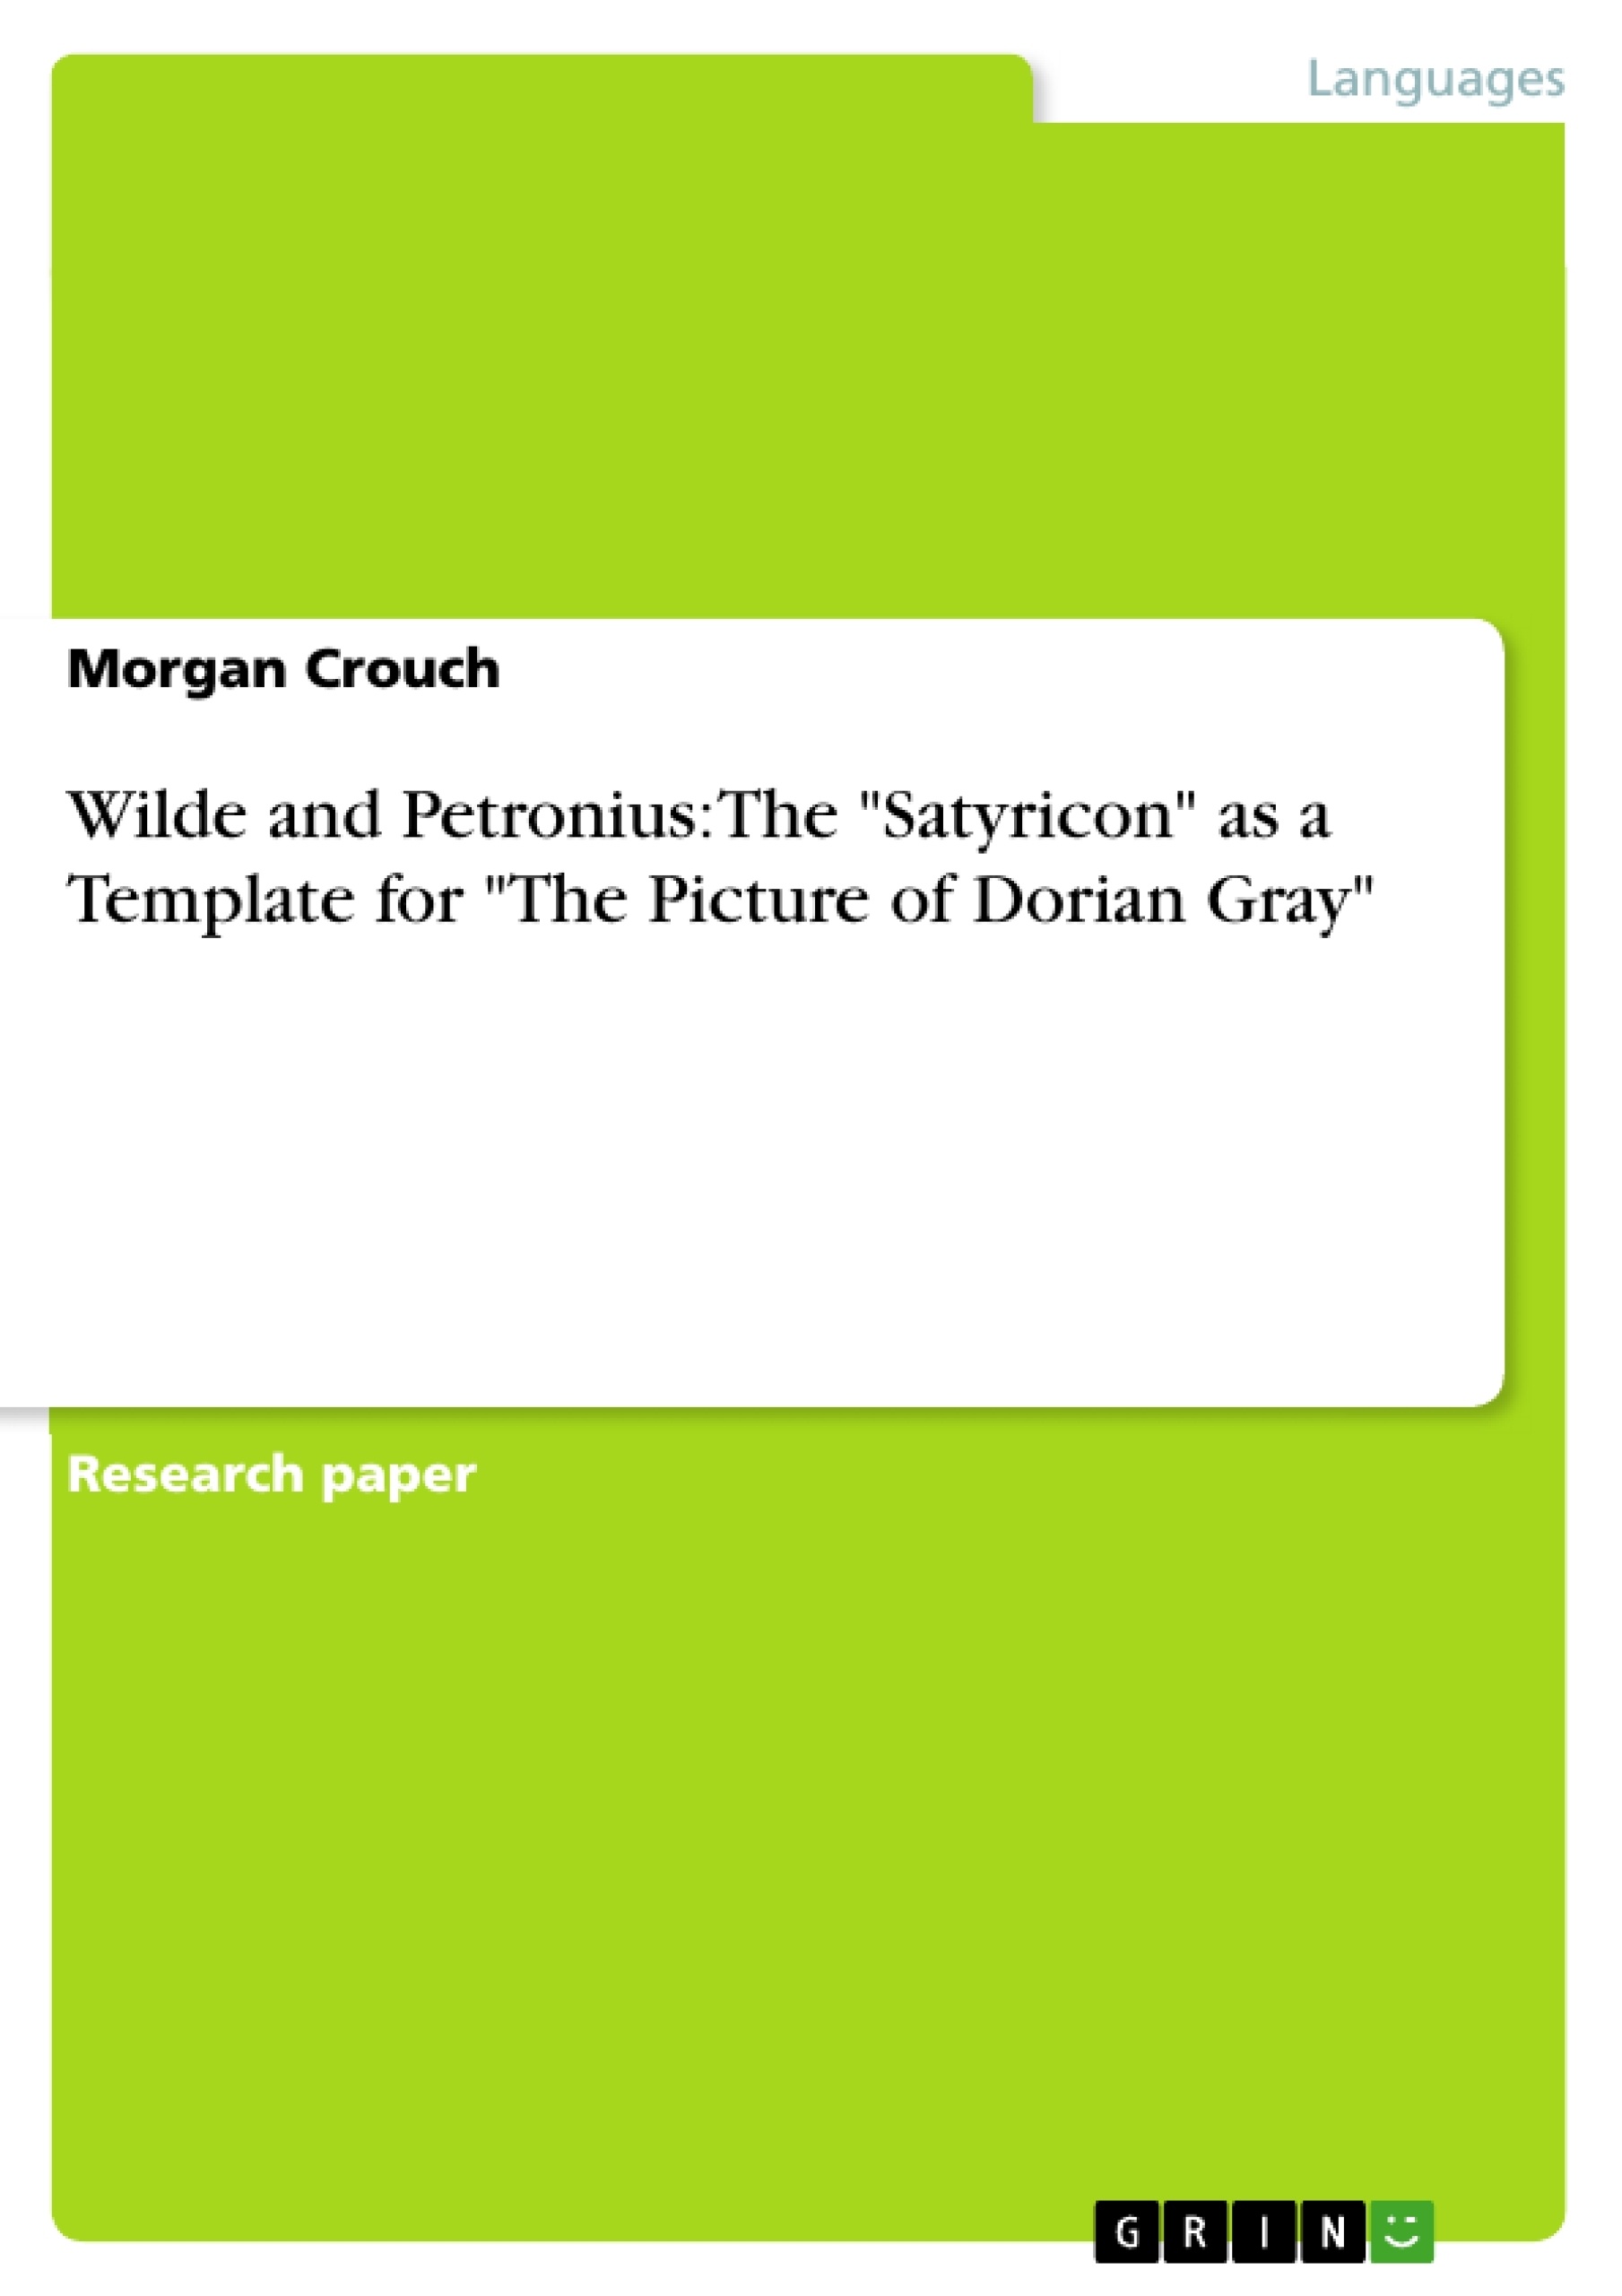 Title: Wilde and Petronius: The "Satyricon" as a Template for "The Picture of Dorian Gray"